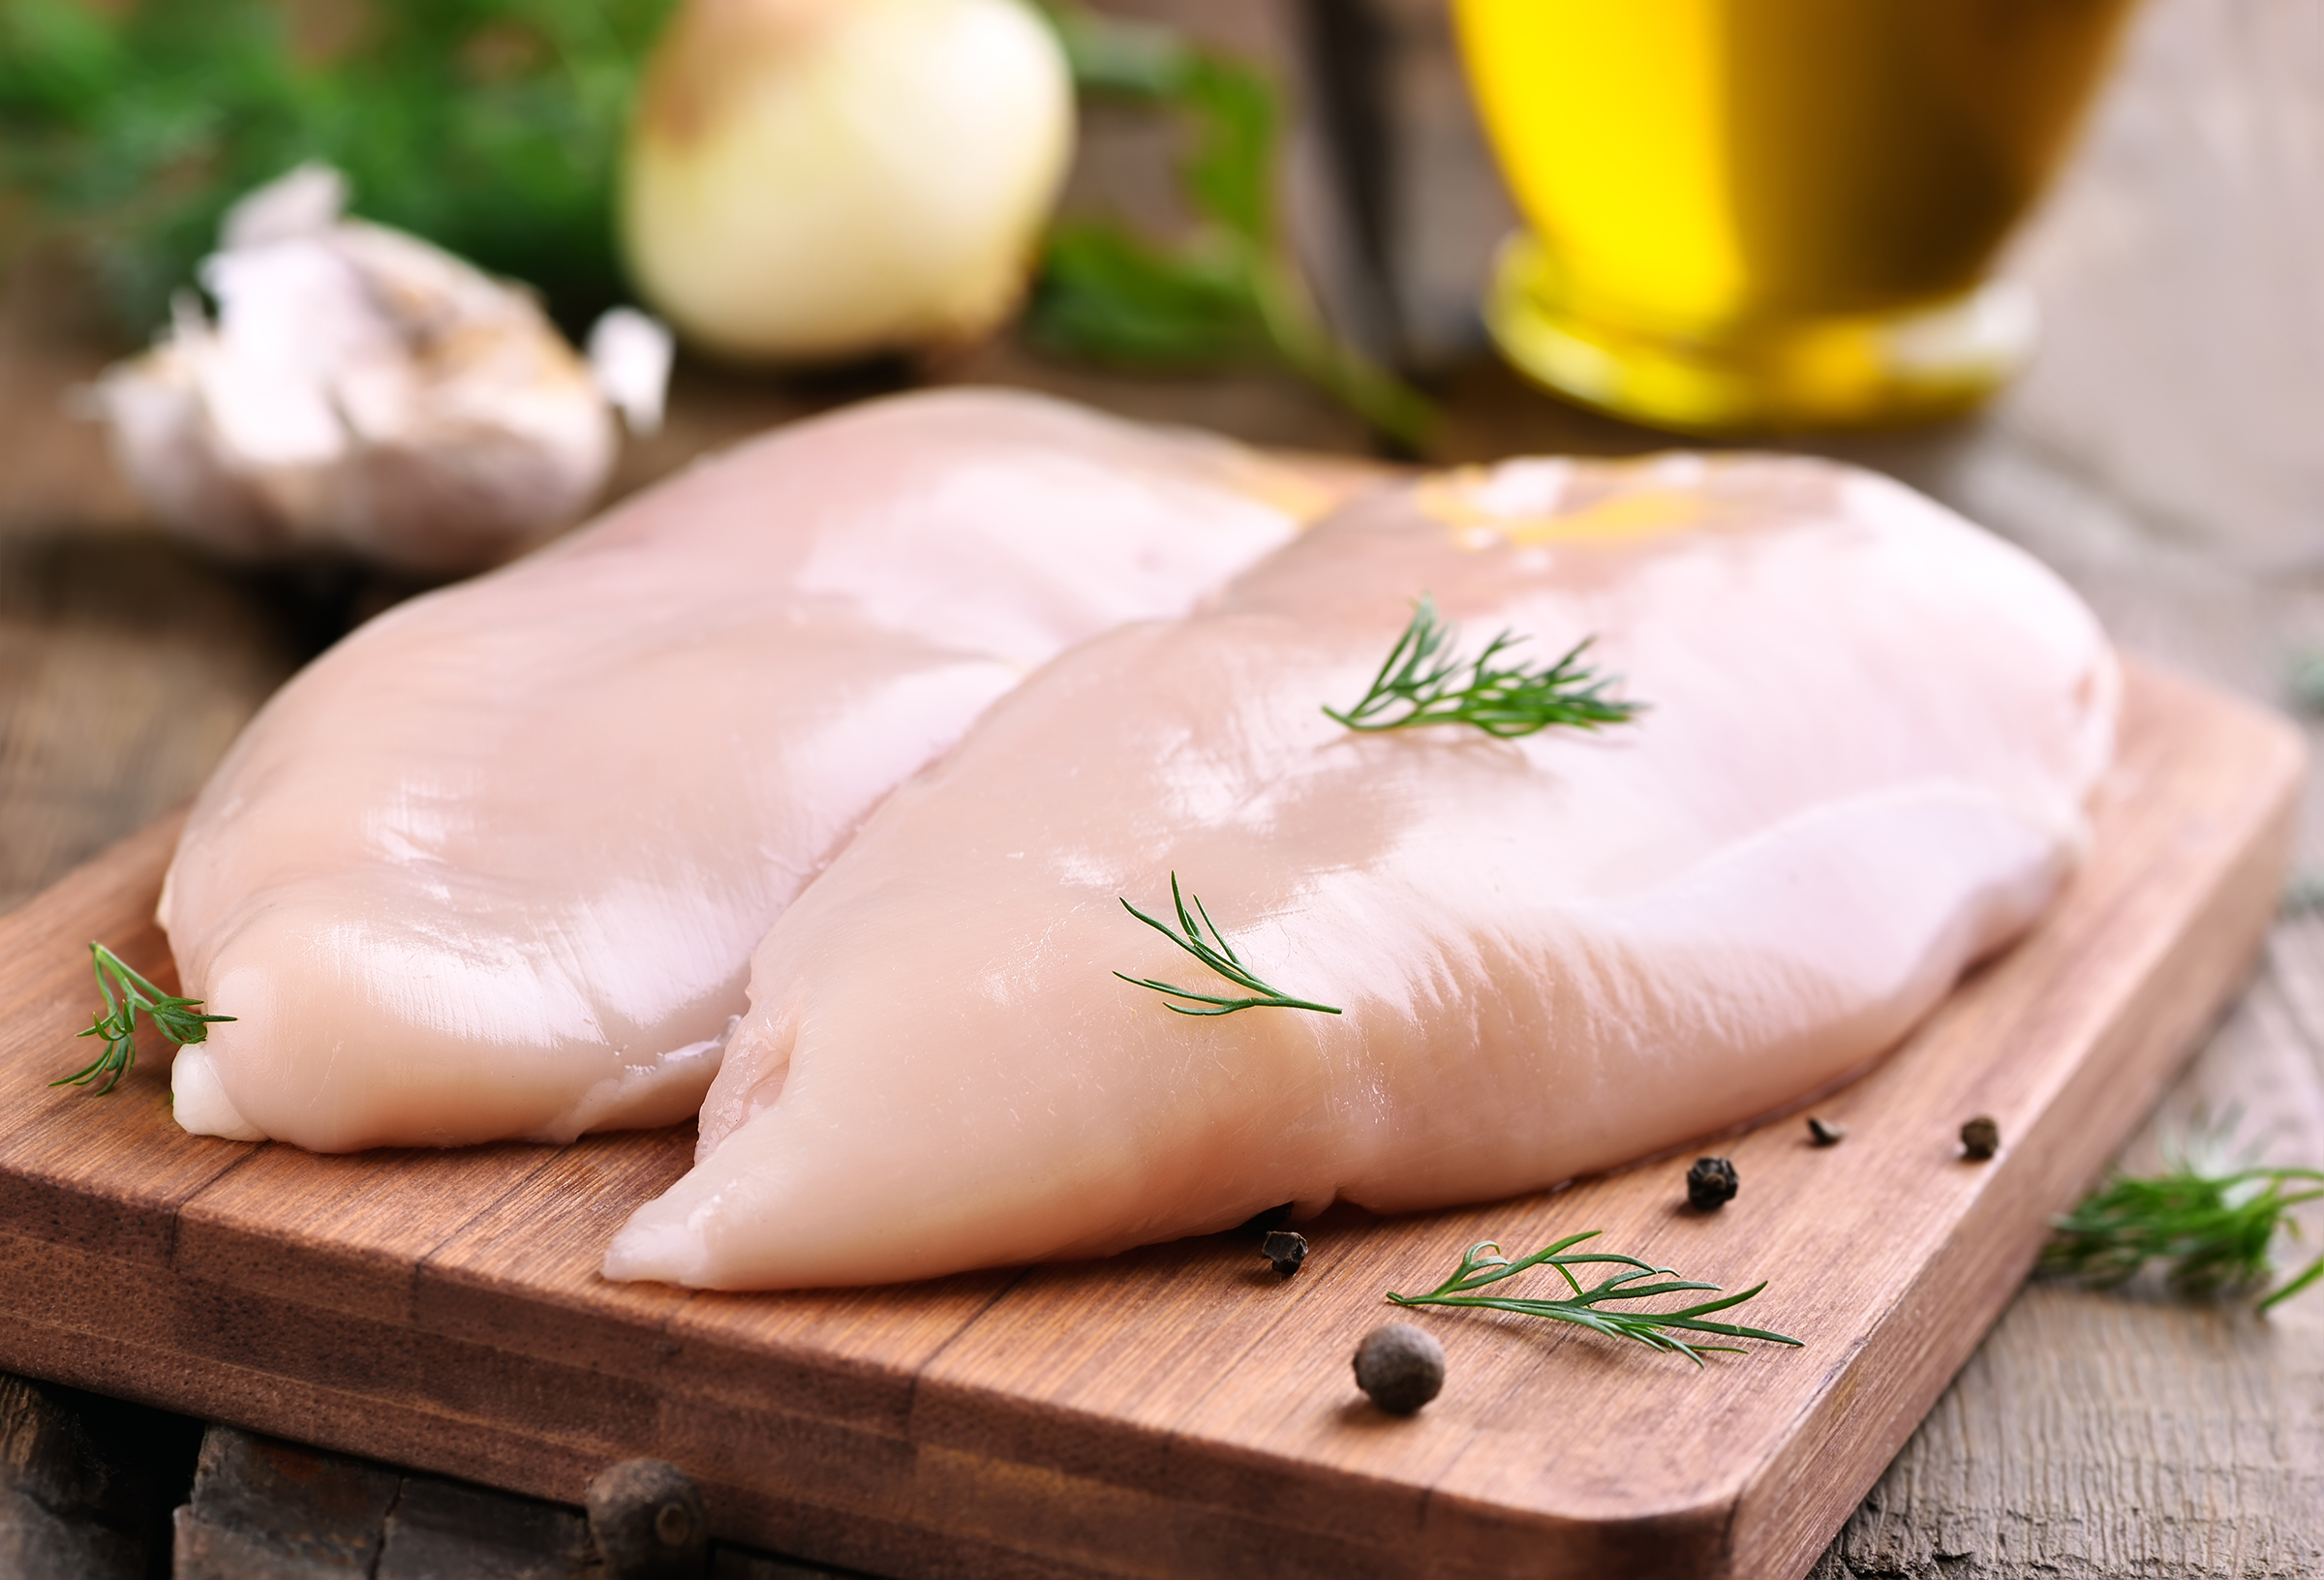 The 5 things every poultry processor should know about food safety